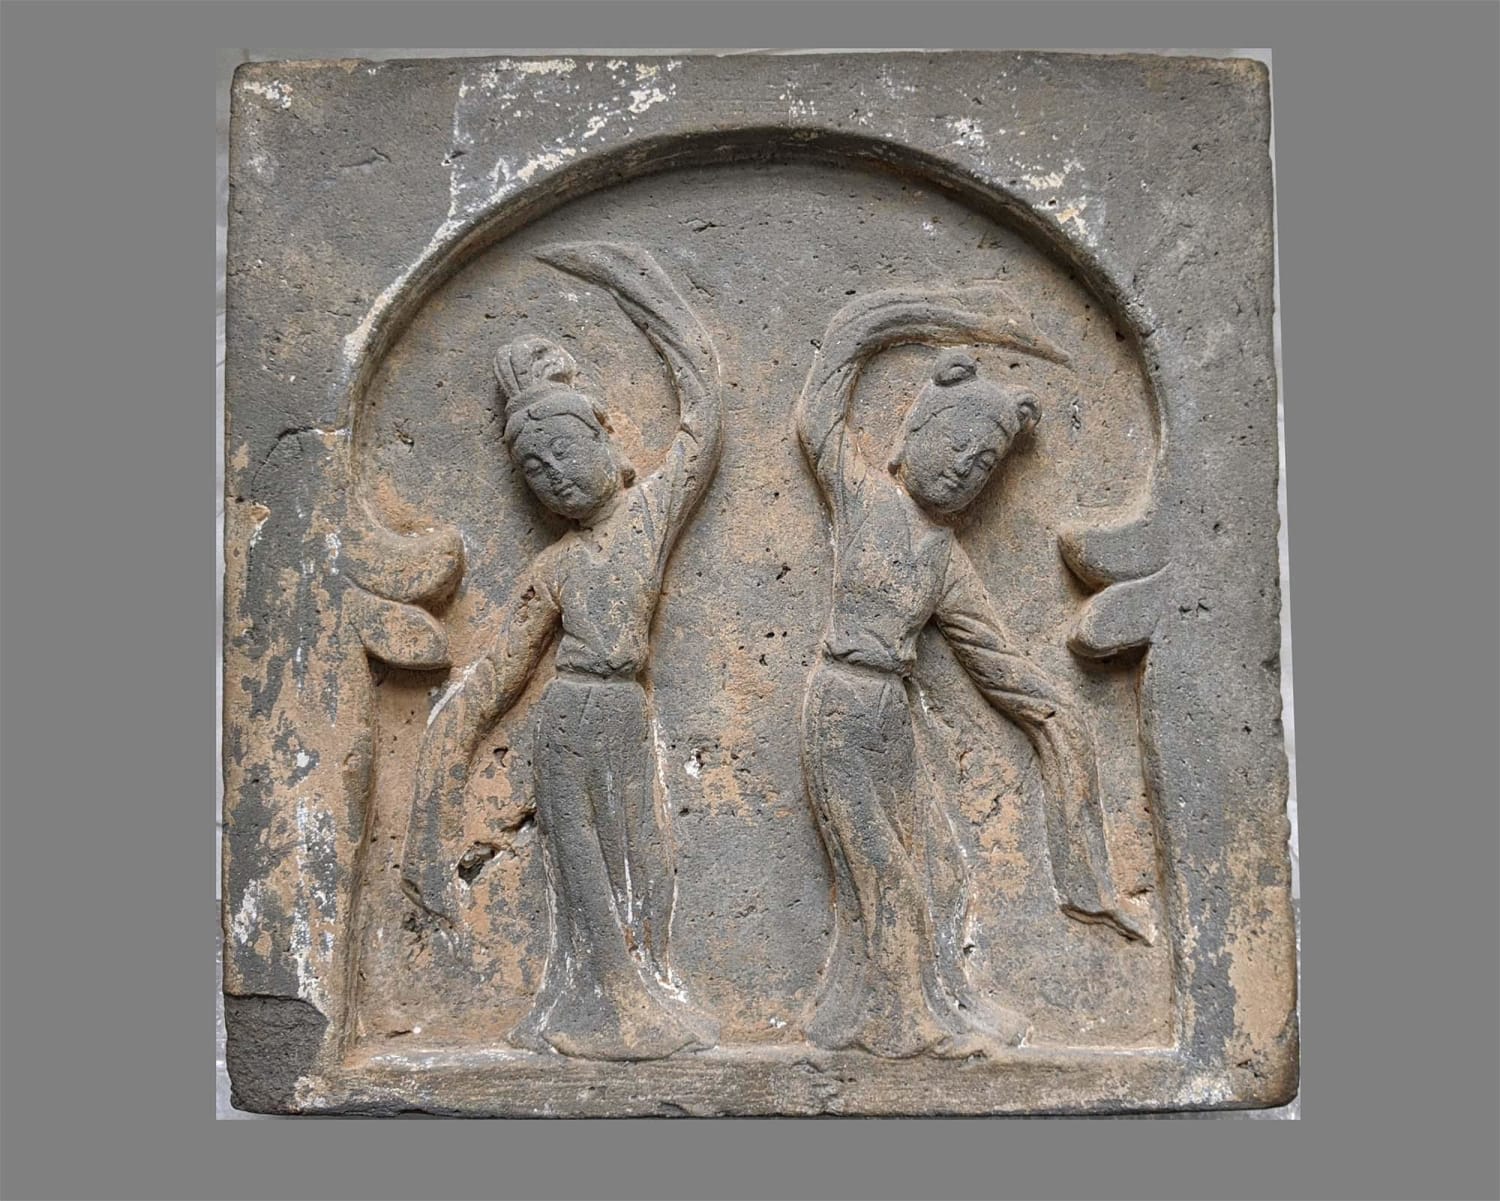 Terracotta Plaque of Elegant Dancers, Chinese, Tang Dynasty (618-907 CE) 12...3 inches. Private Collection